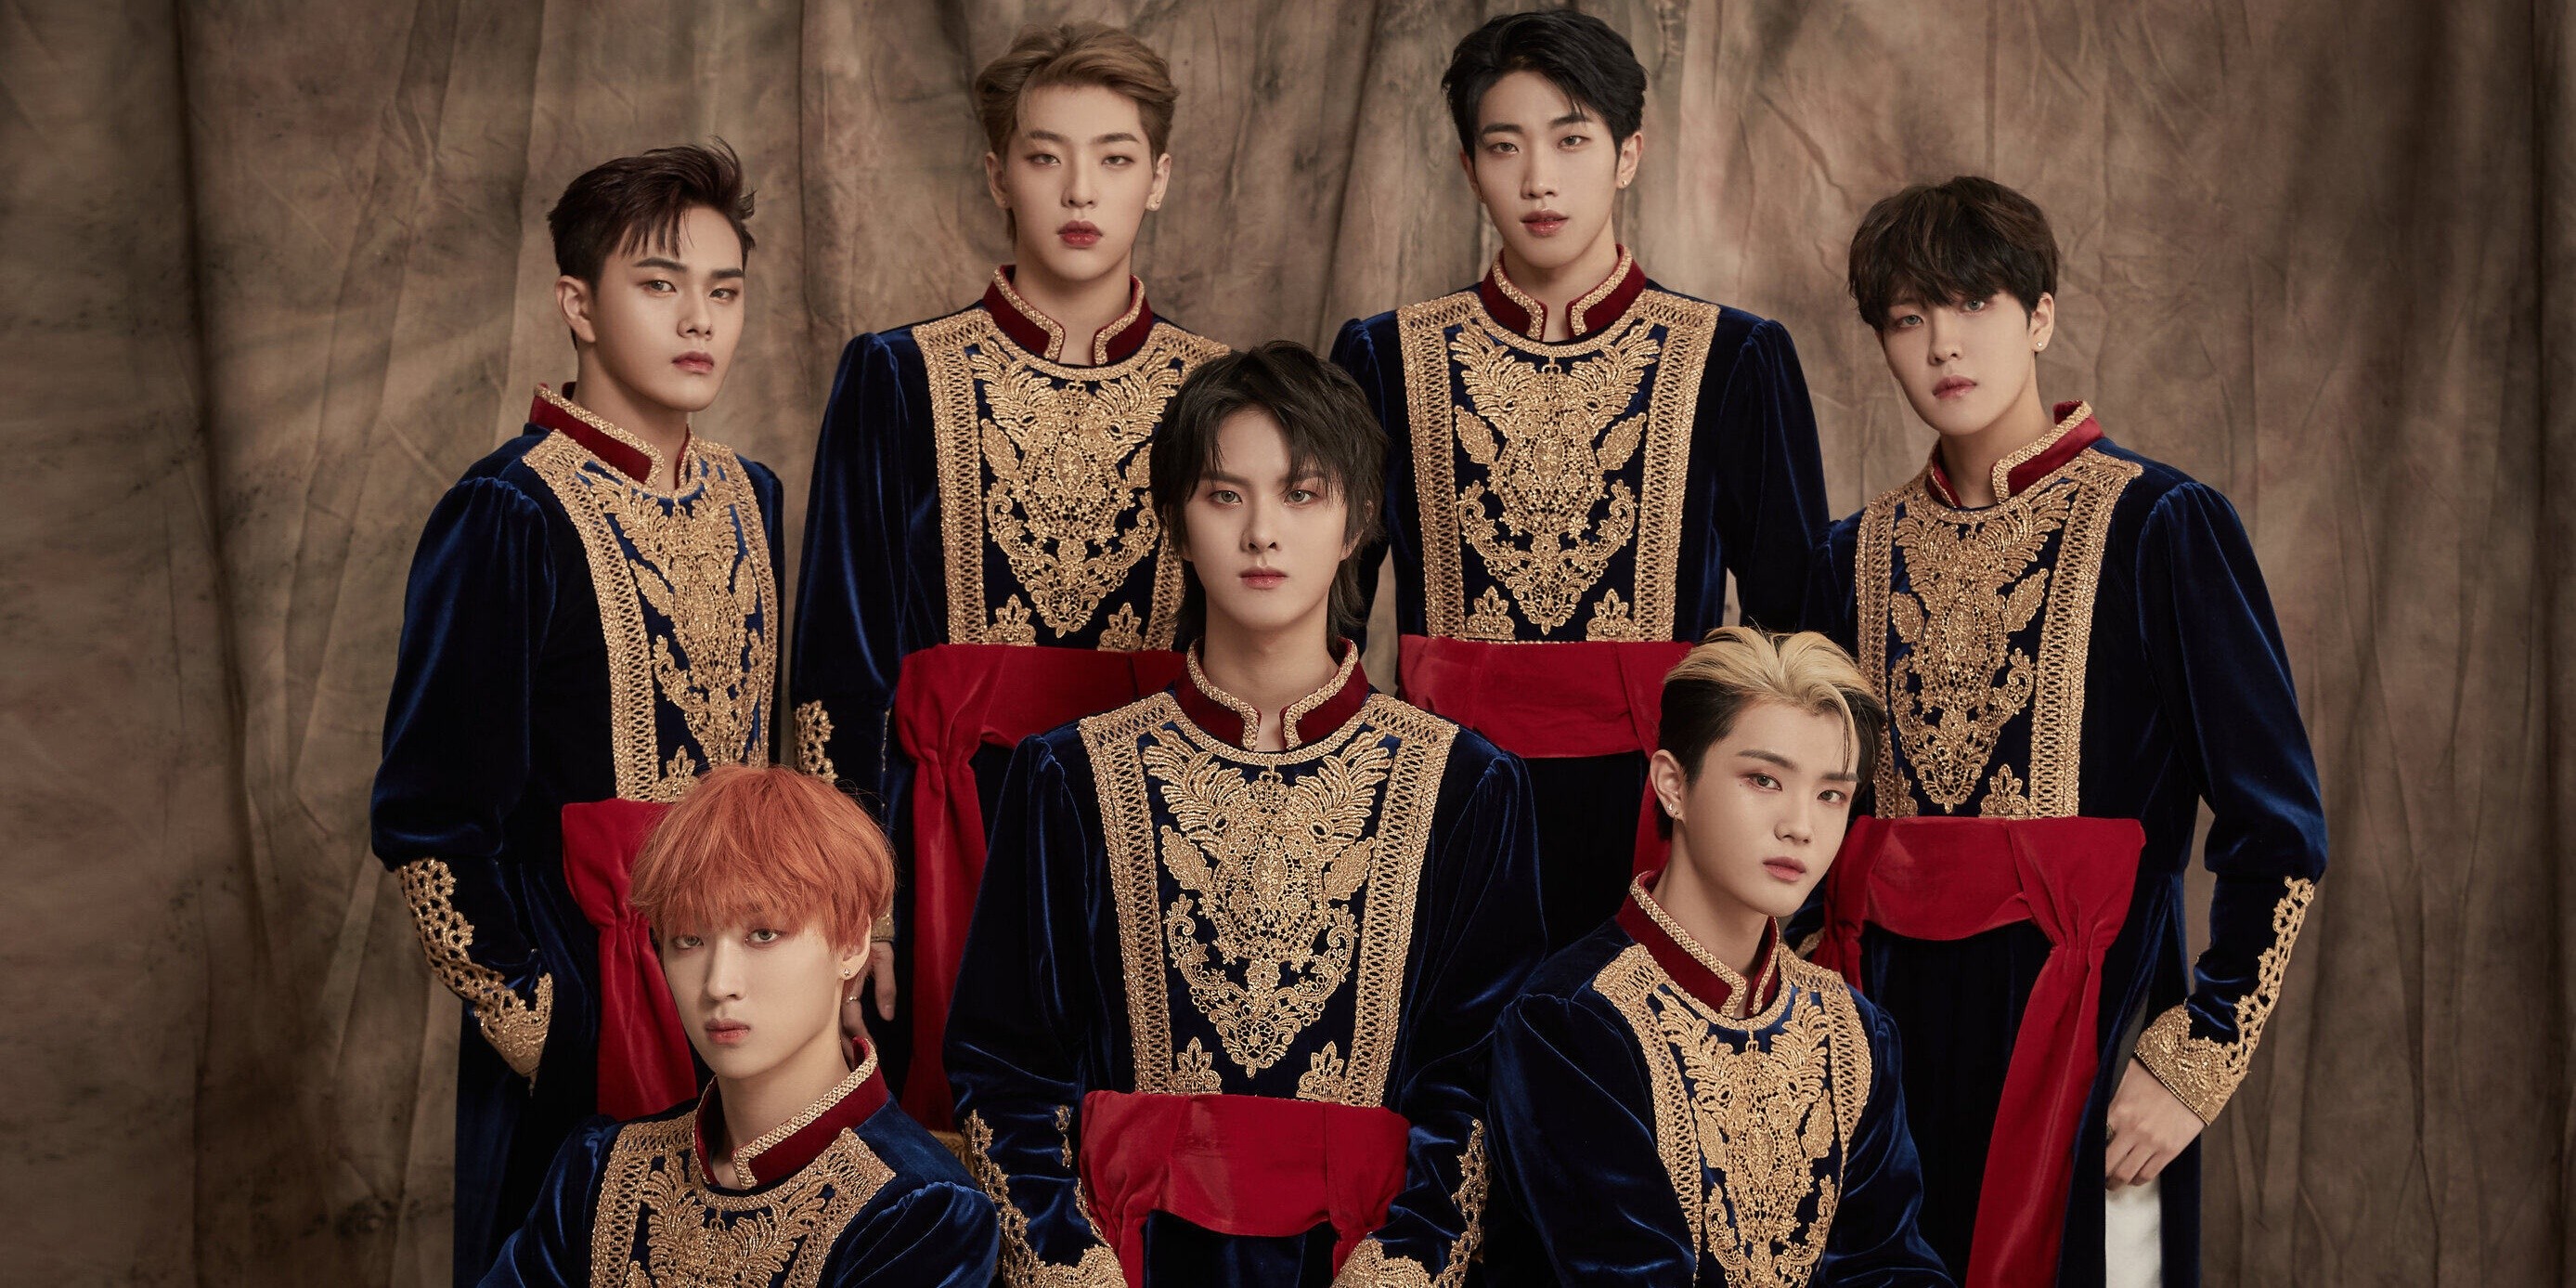 Introducing: KINGDOM on their royal concept — from creating a fictional universe to representing historical kings